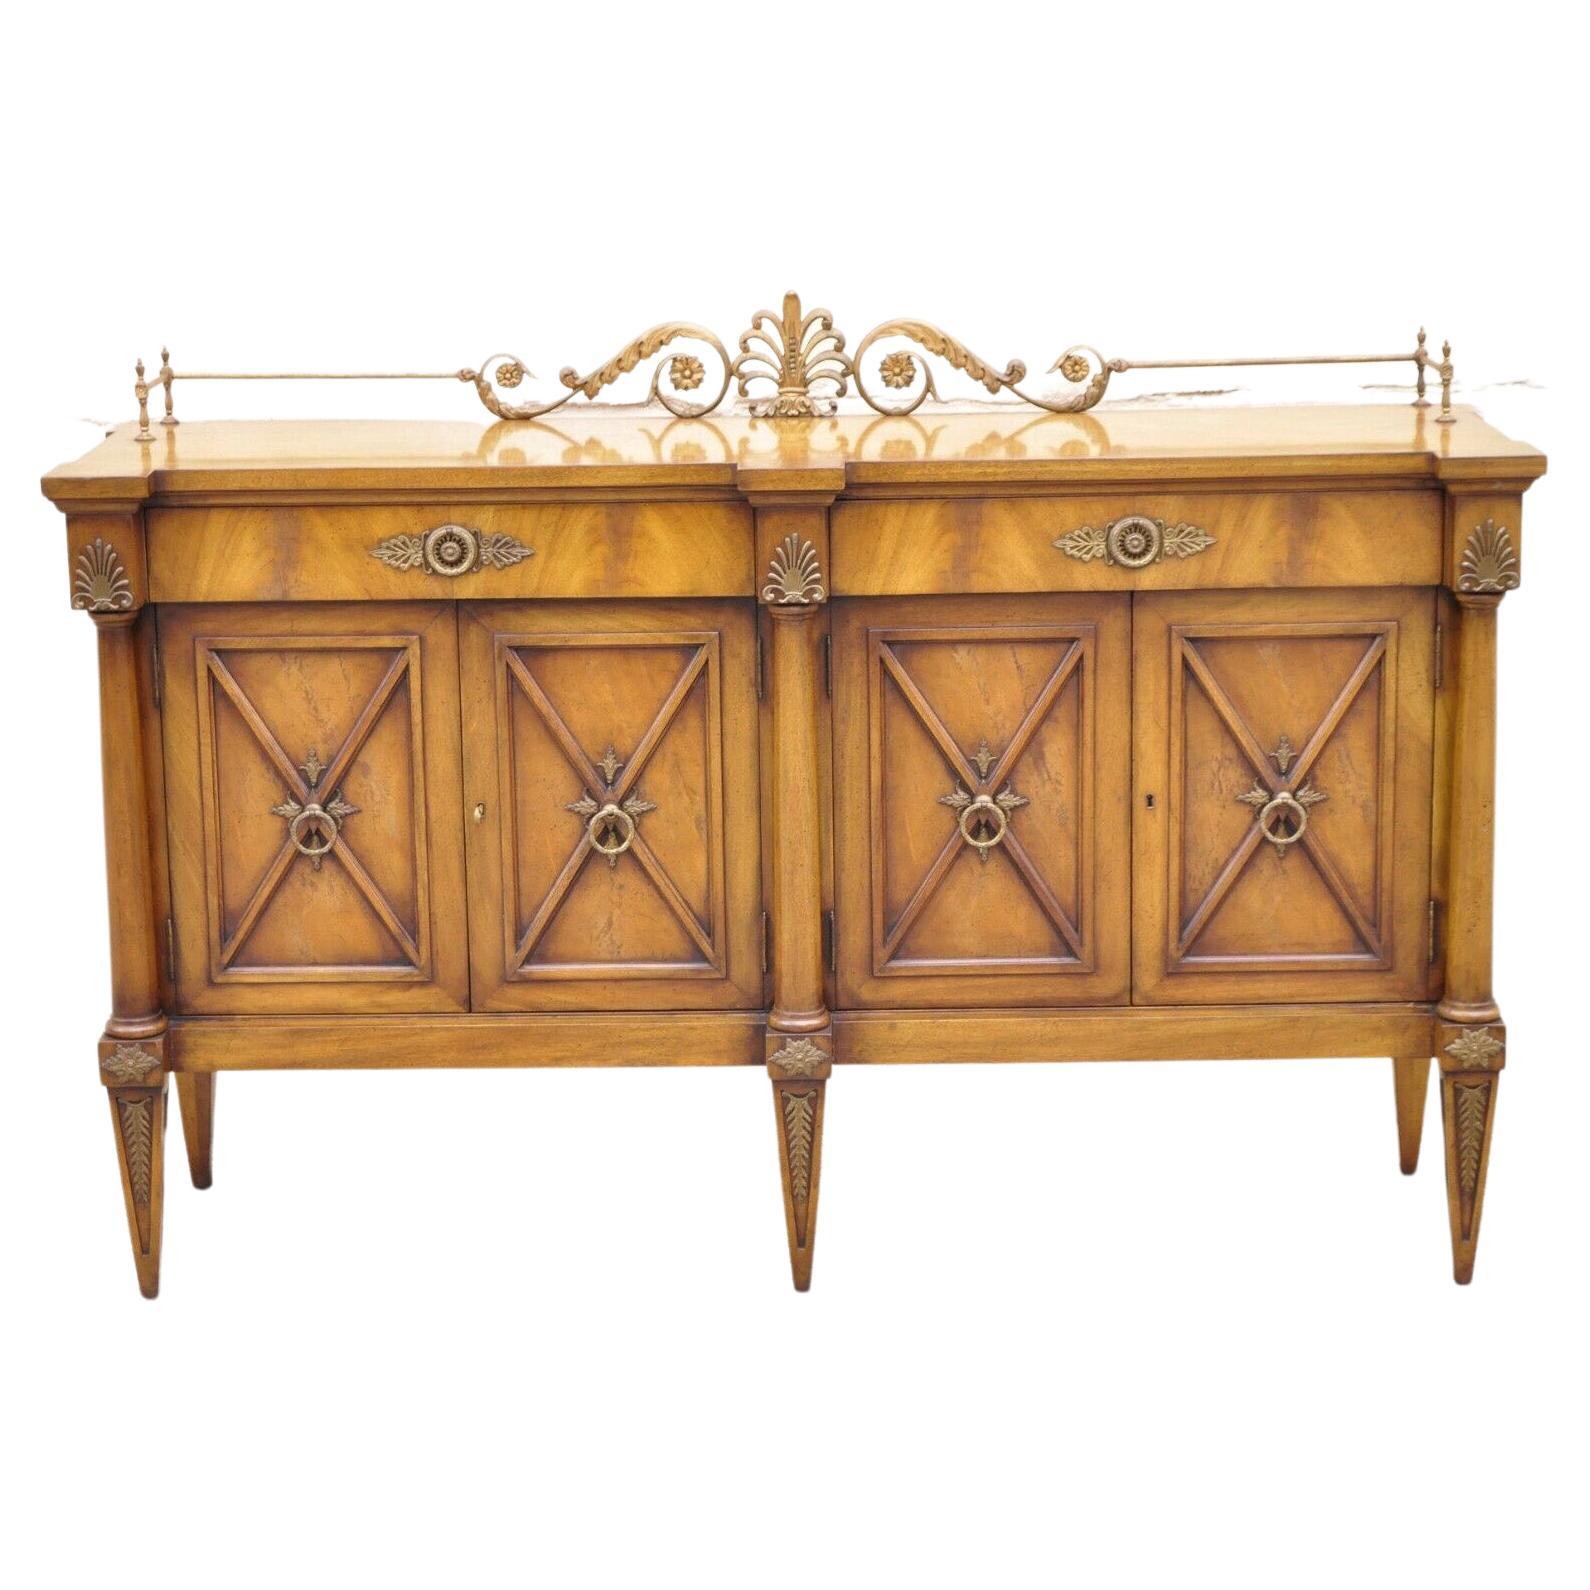 Karges Neoclassical Regency Style Mahogany Sideboard Buffet with Brass Ormolu